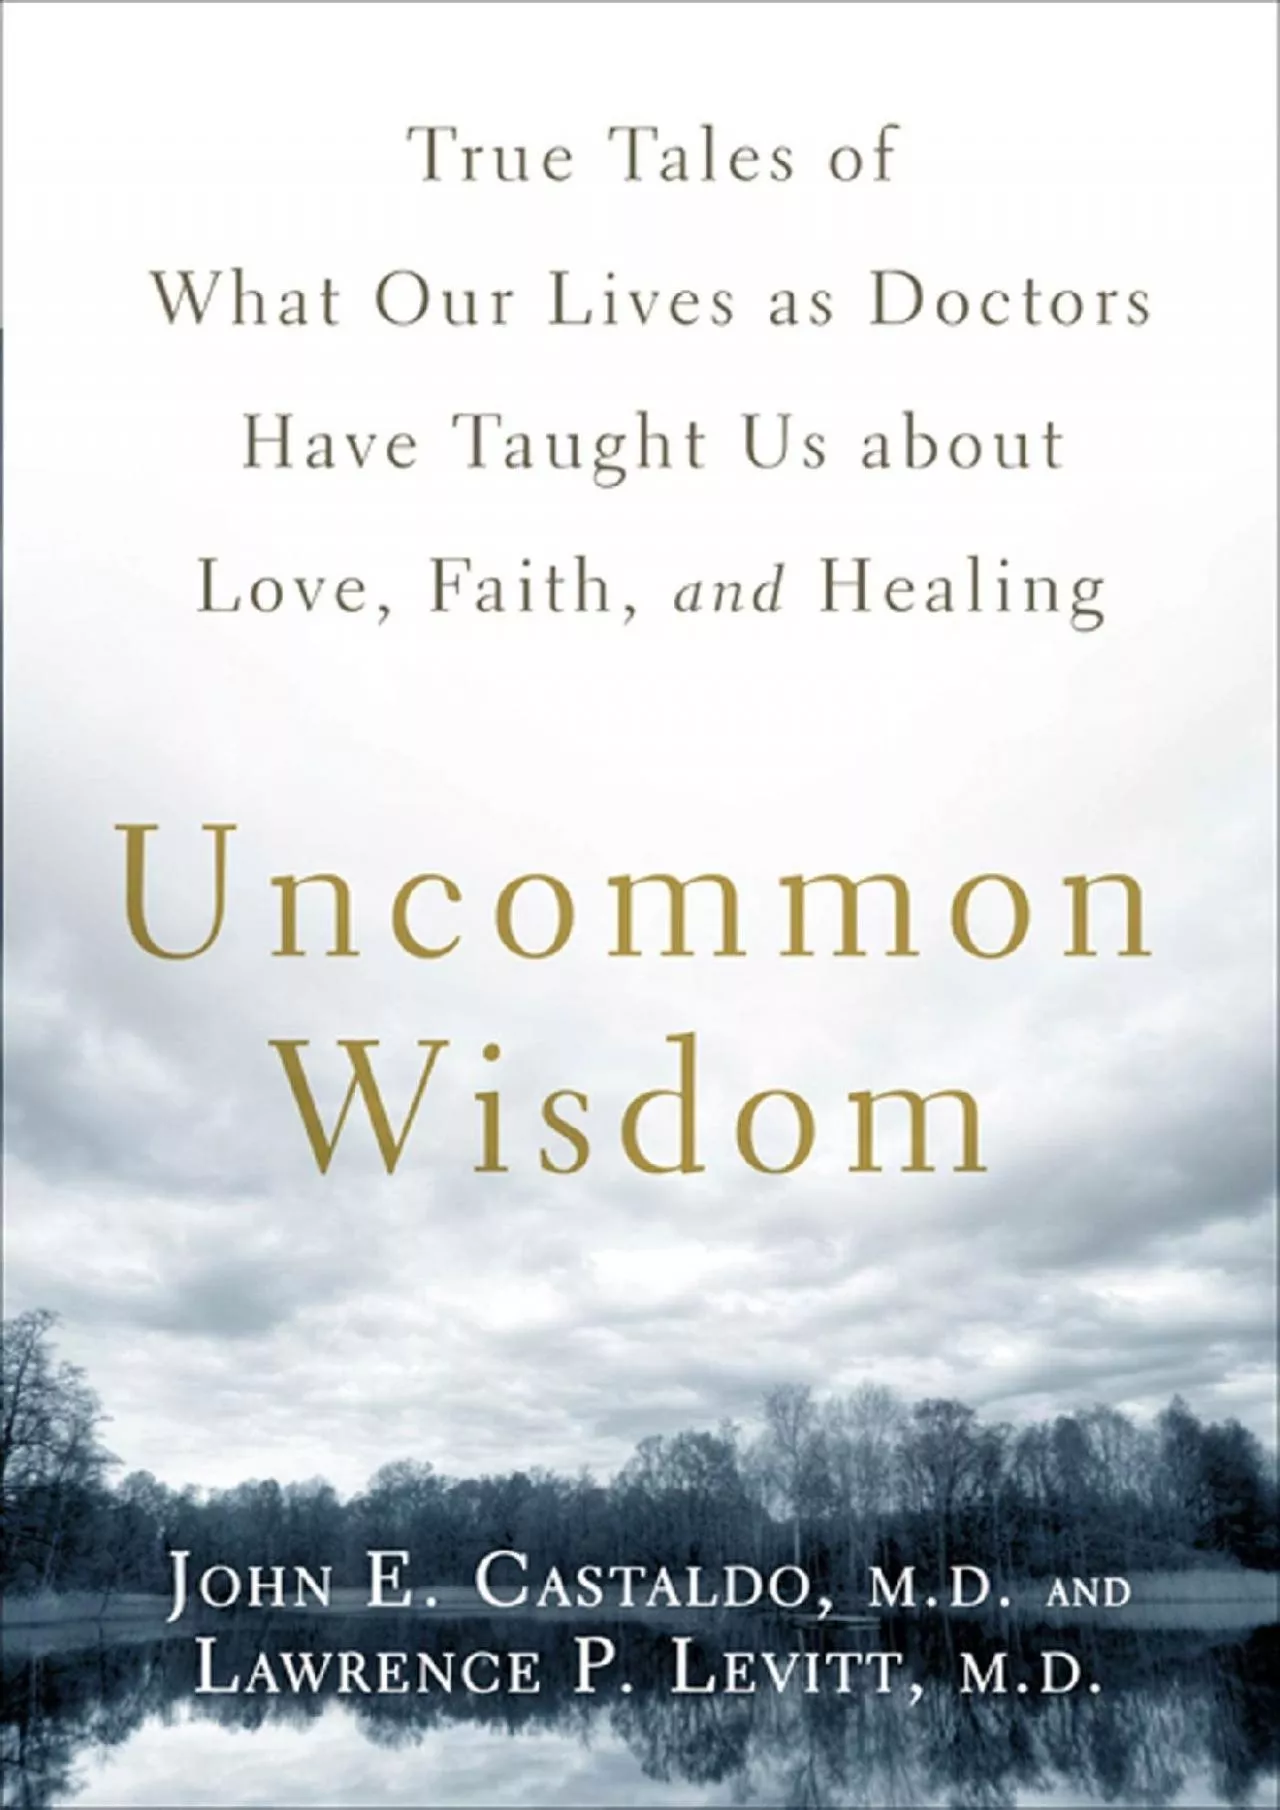 (DOWNLOAD)-Uncommon Wisdom: True Tales of What Our Lives as Doctors Have Taught Us About